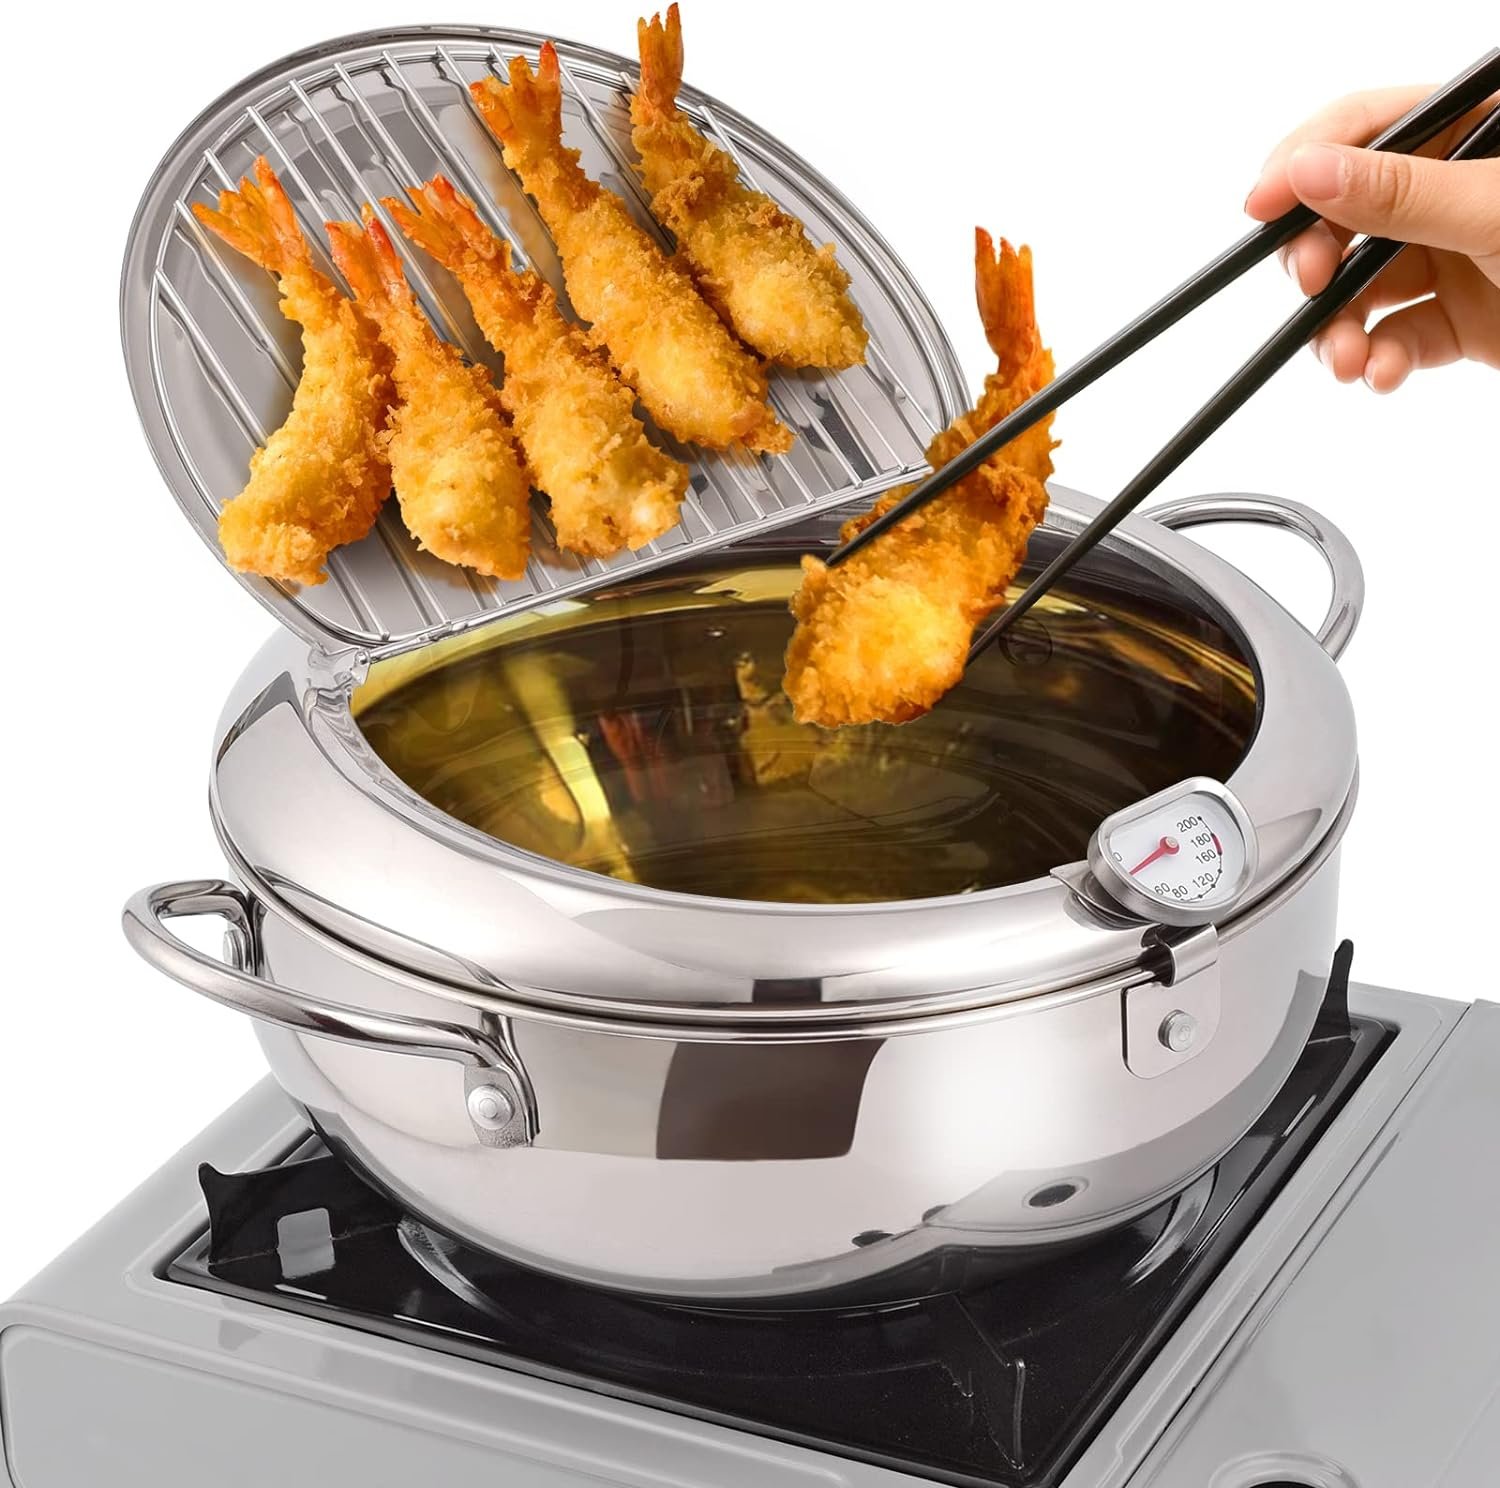 Oxydrily Japanese Tempura Deep Fryer Review